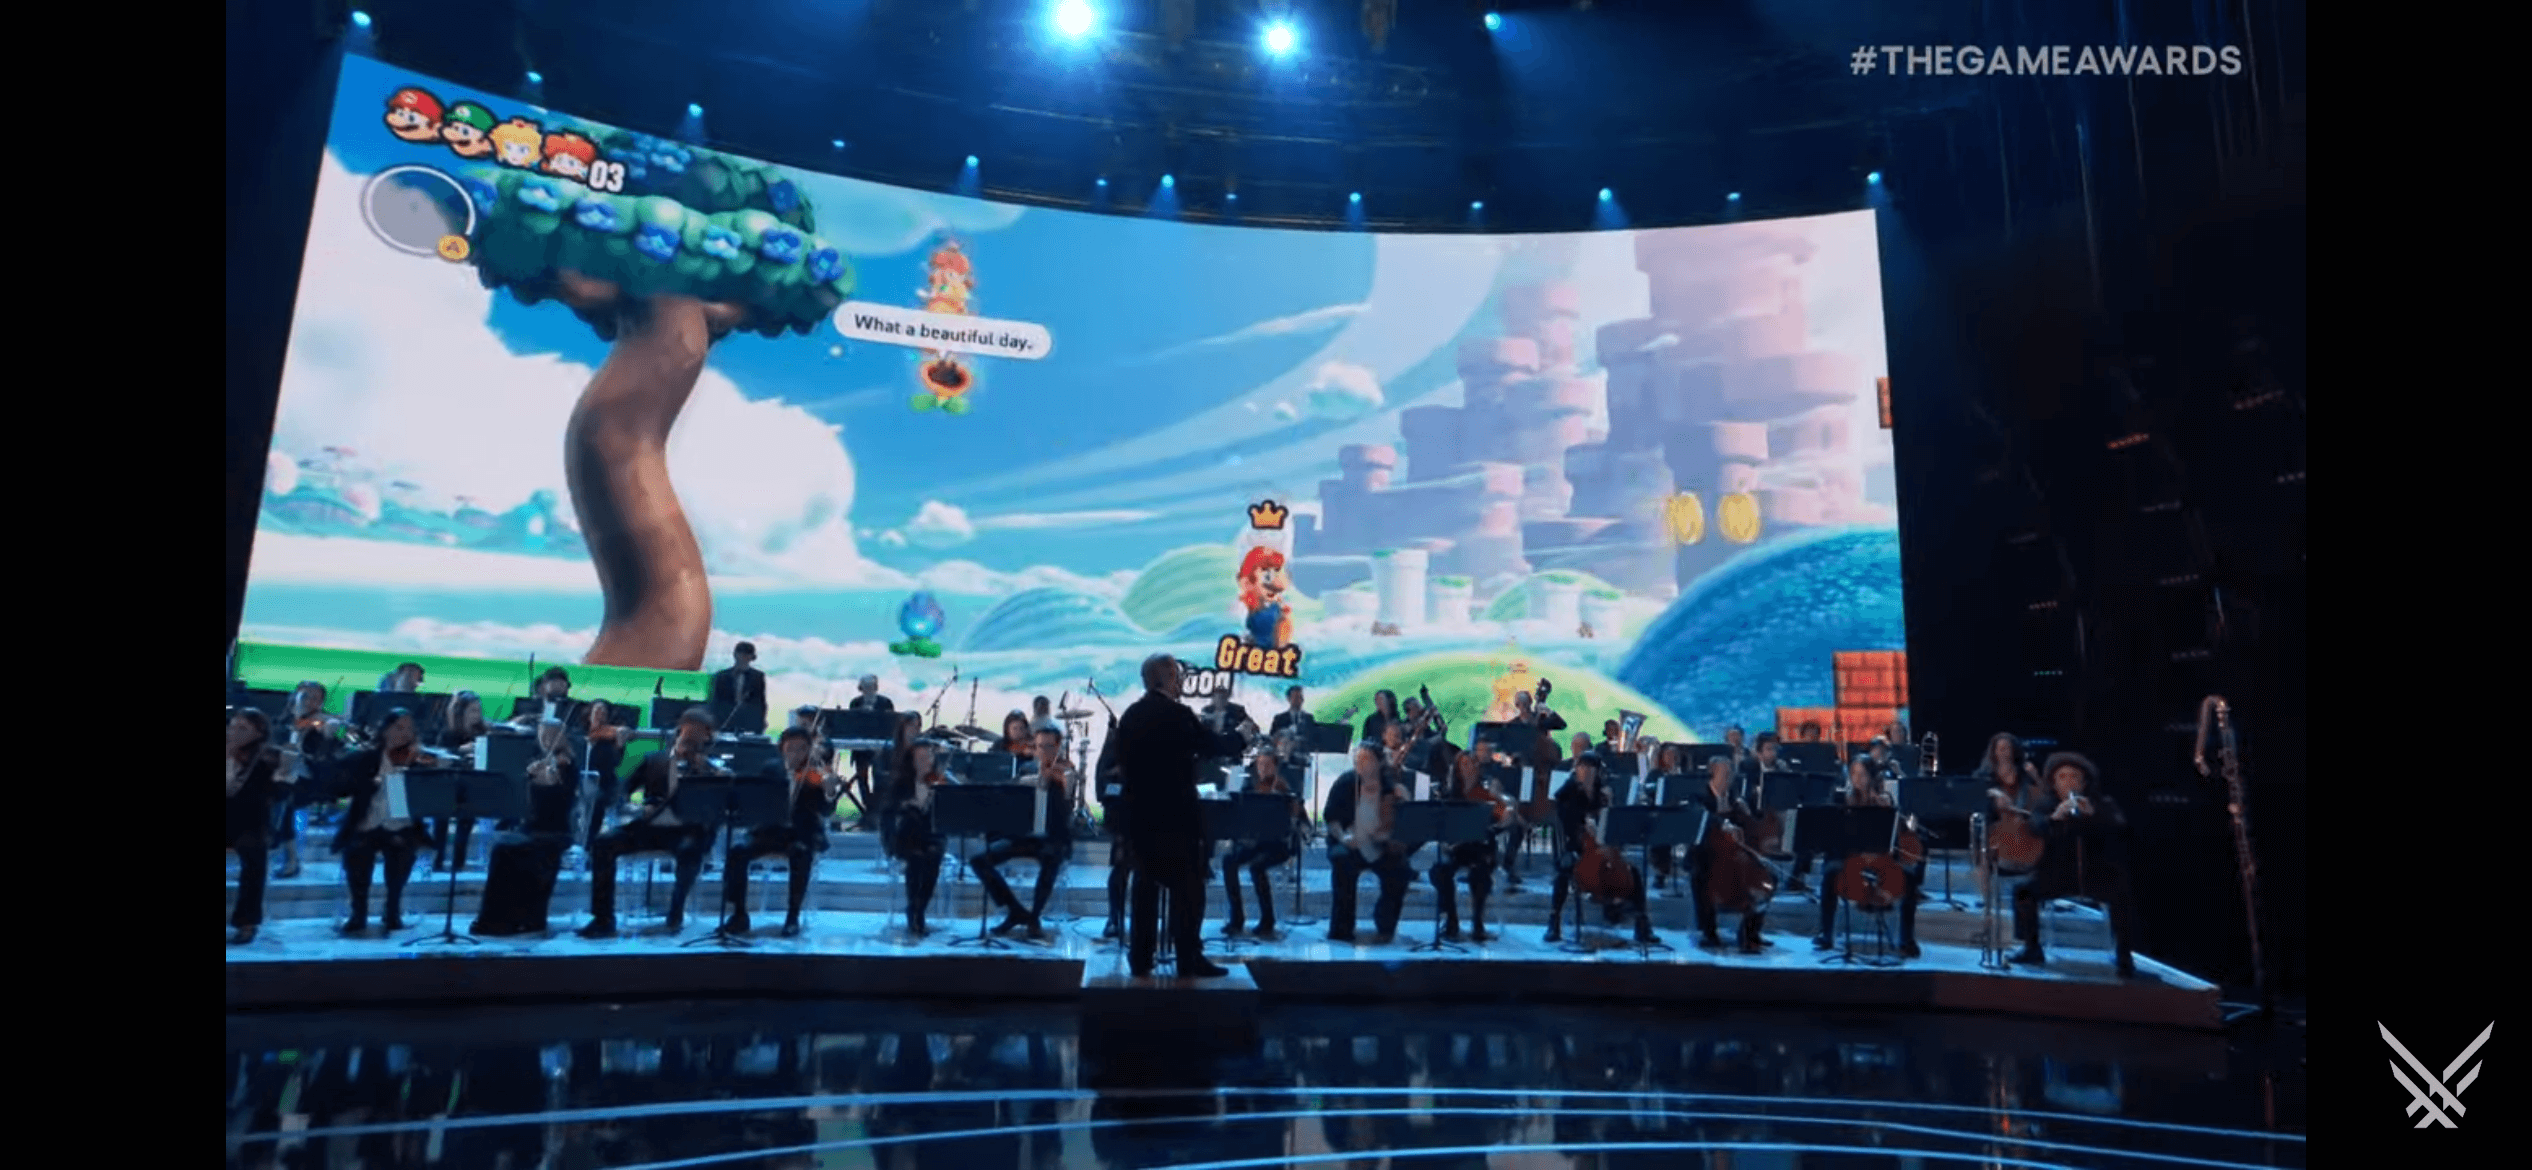 The game awards orchestra playing music while displaying many games in the background.